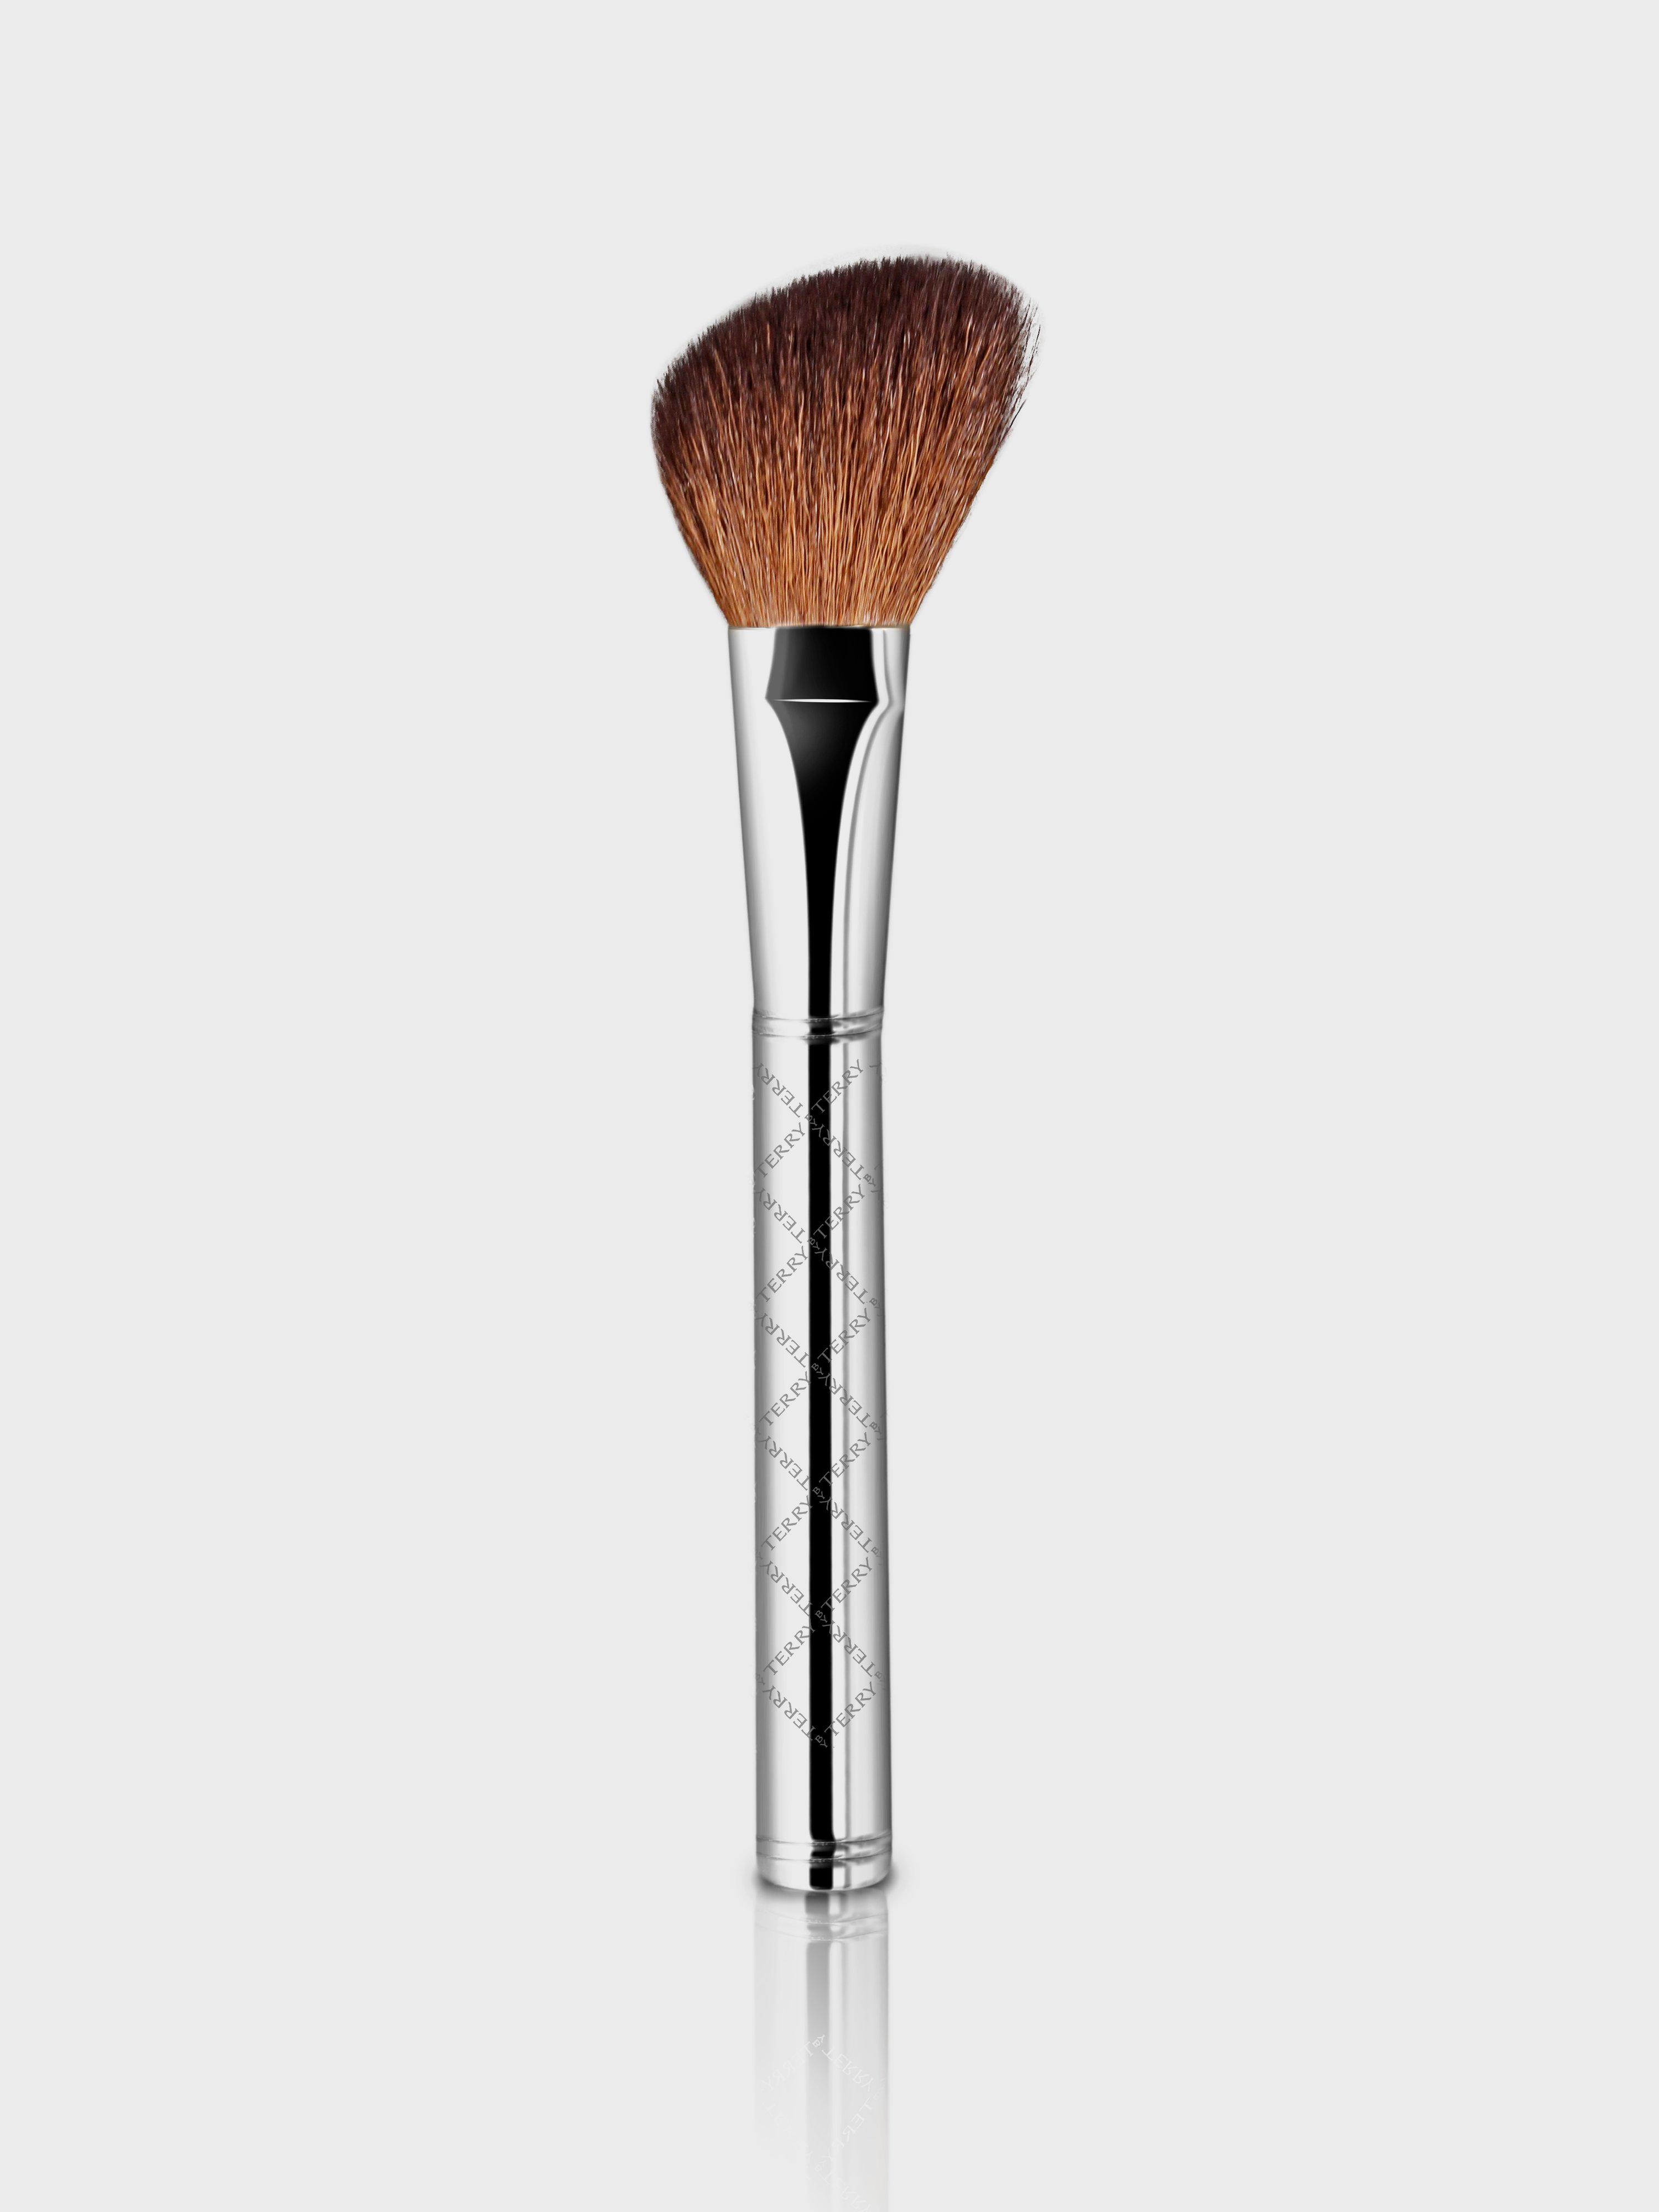 BY TERRY BY TERRY BLUSH BRUSH